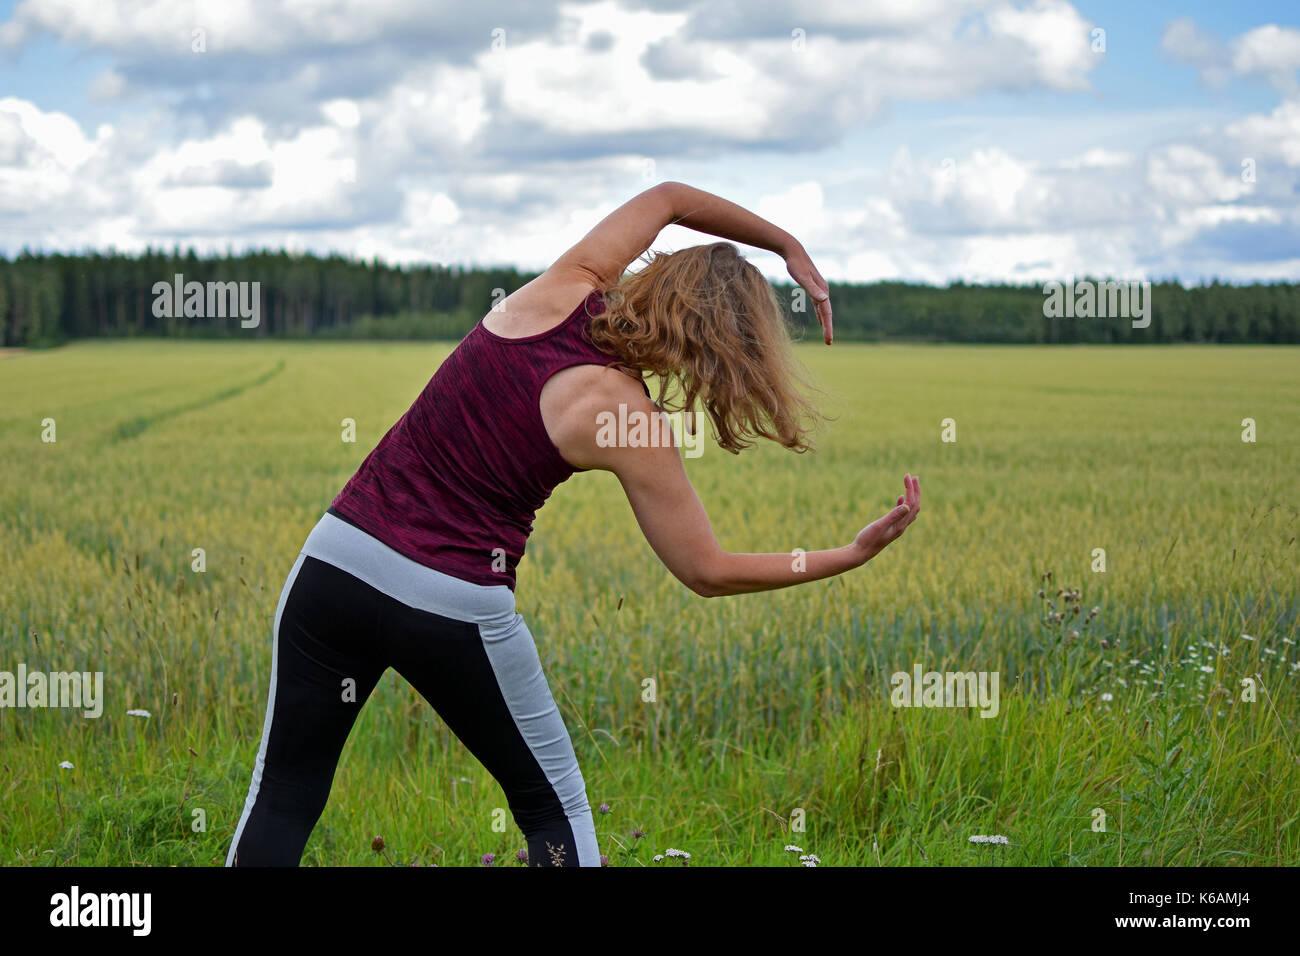 Middle aged yoga woman stretching and exercise outdoors. Rear view, field on background. Stock Photo